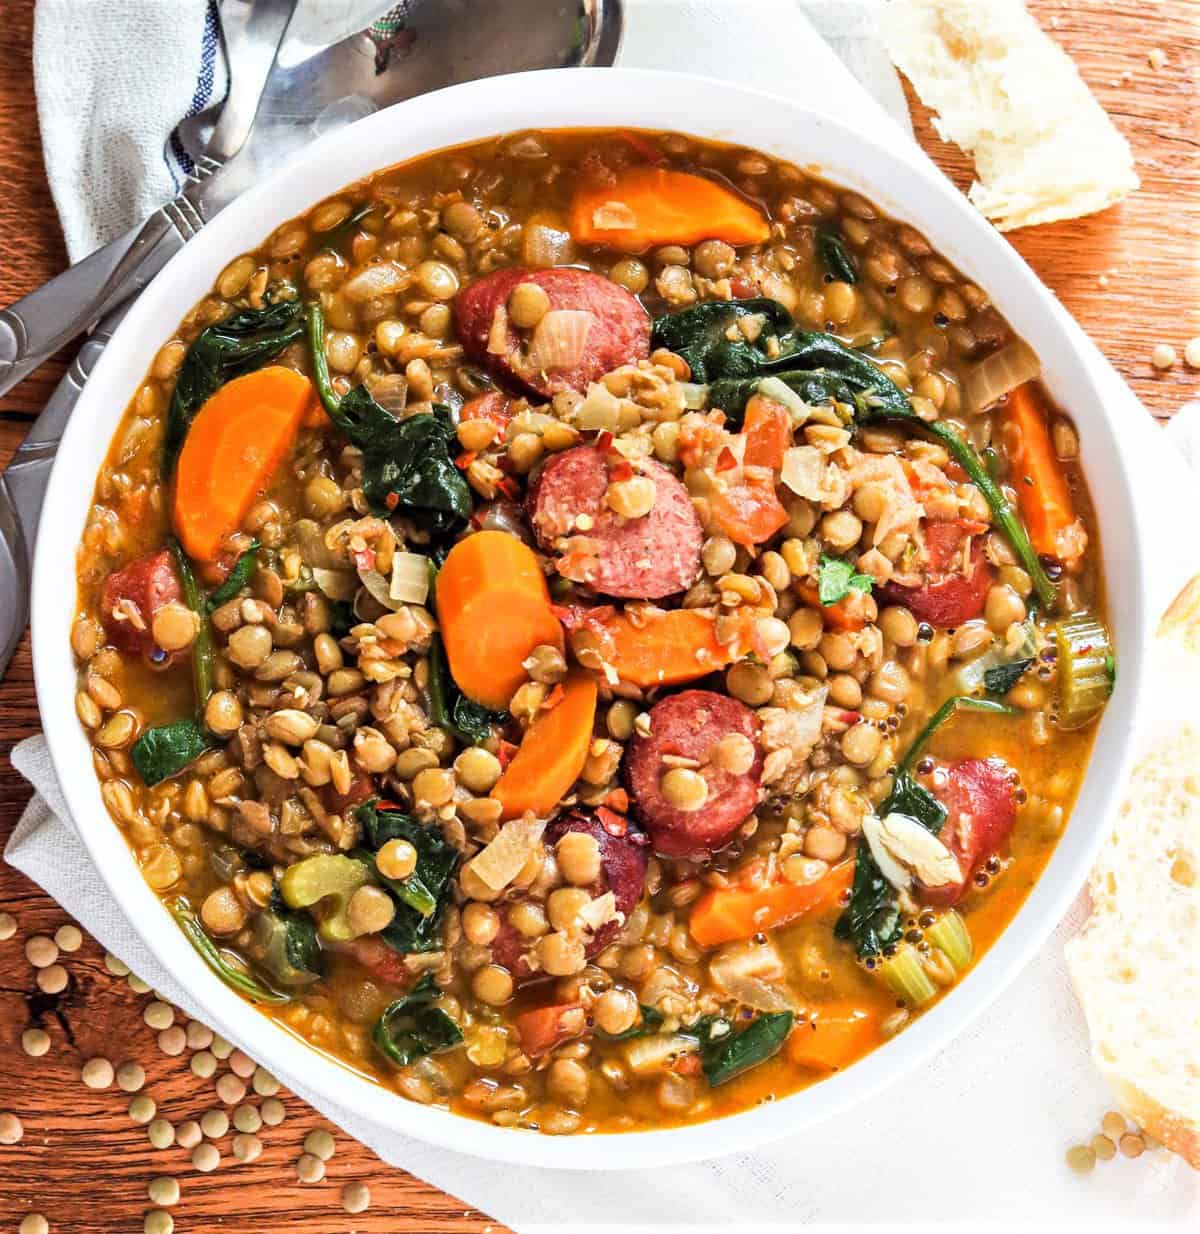 Sausage Lentil Soup – Hearty, satisfying, and flavorful